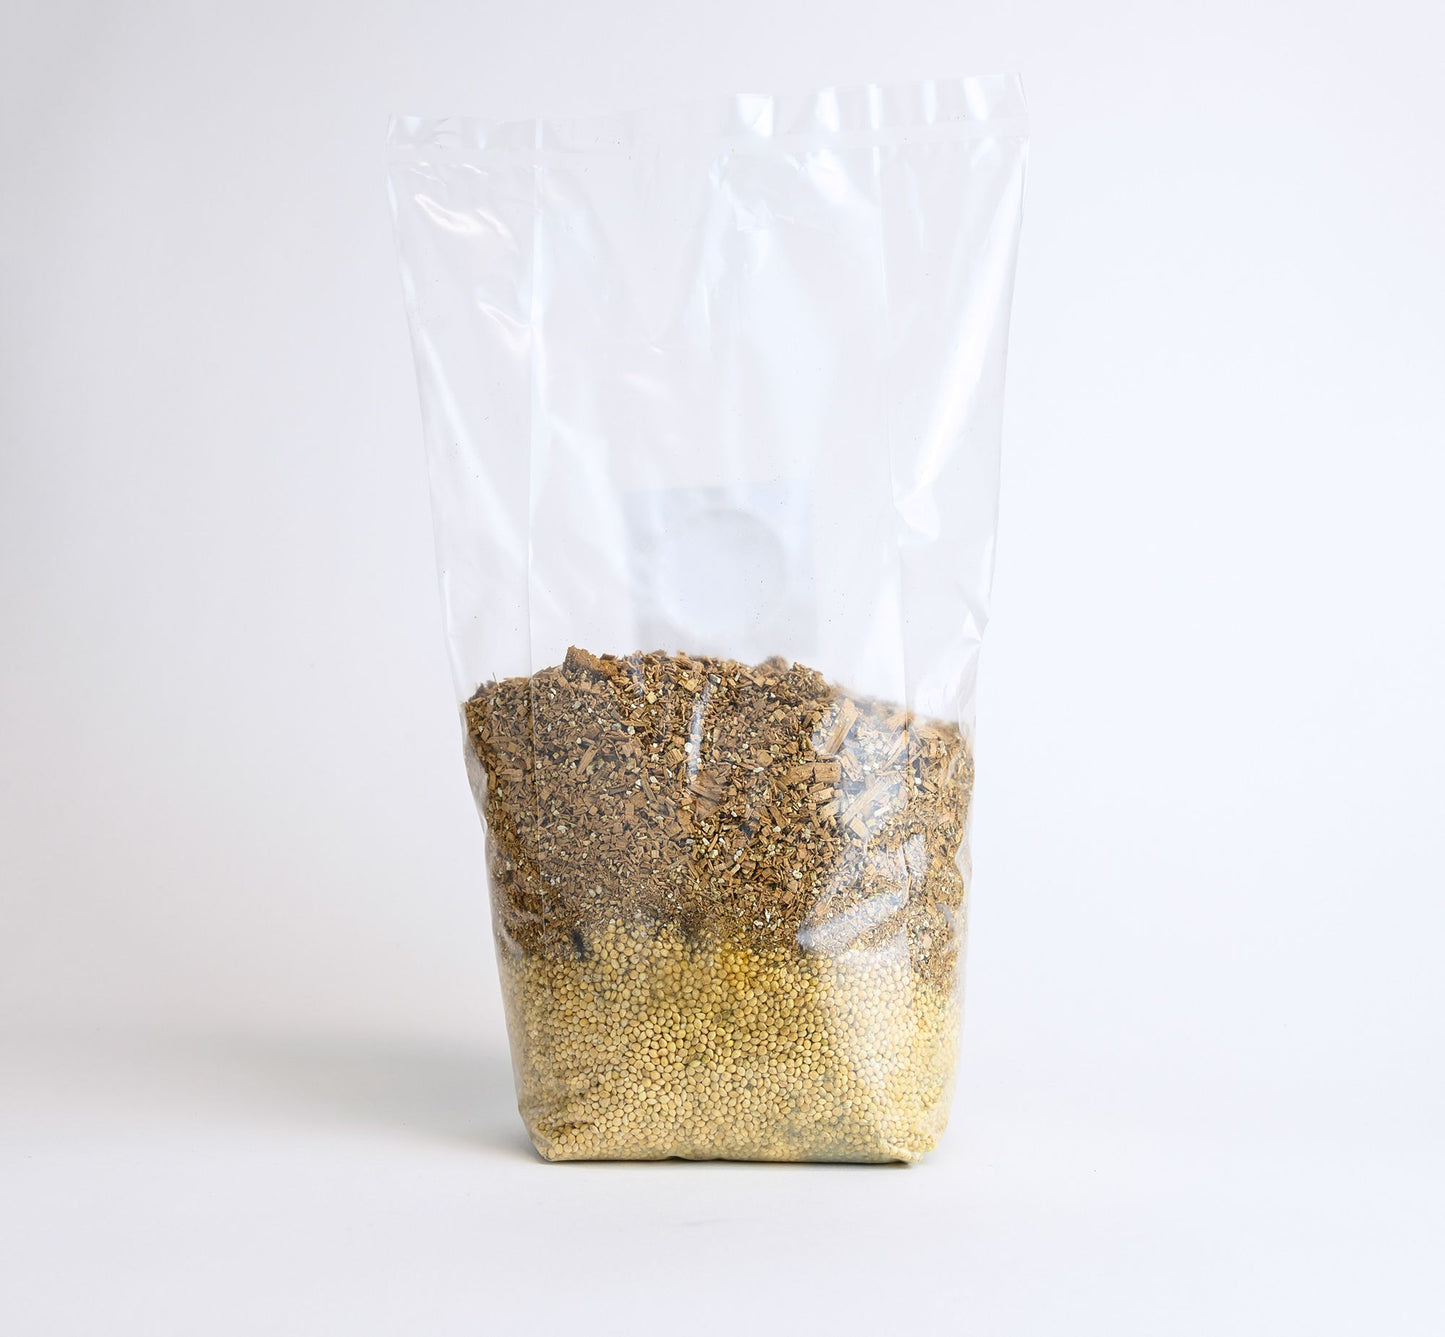 All-In-One Mushroom Grow Bag (with Injection Port) for Wood Loving mushrooms